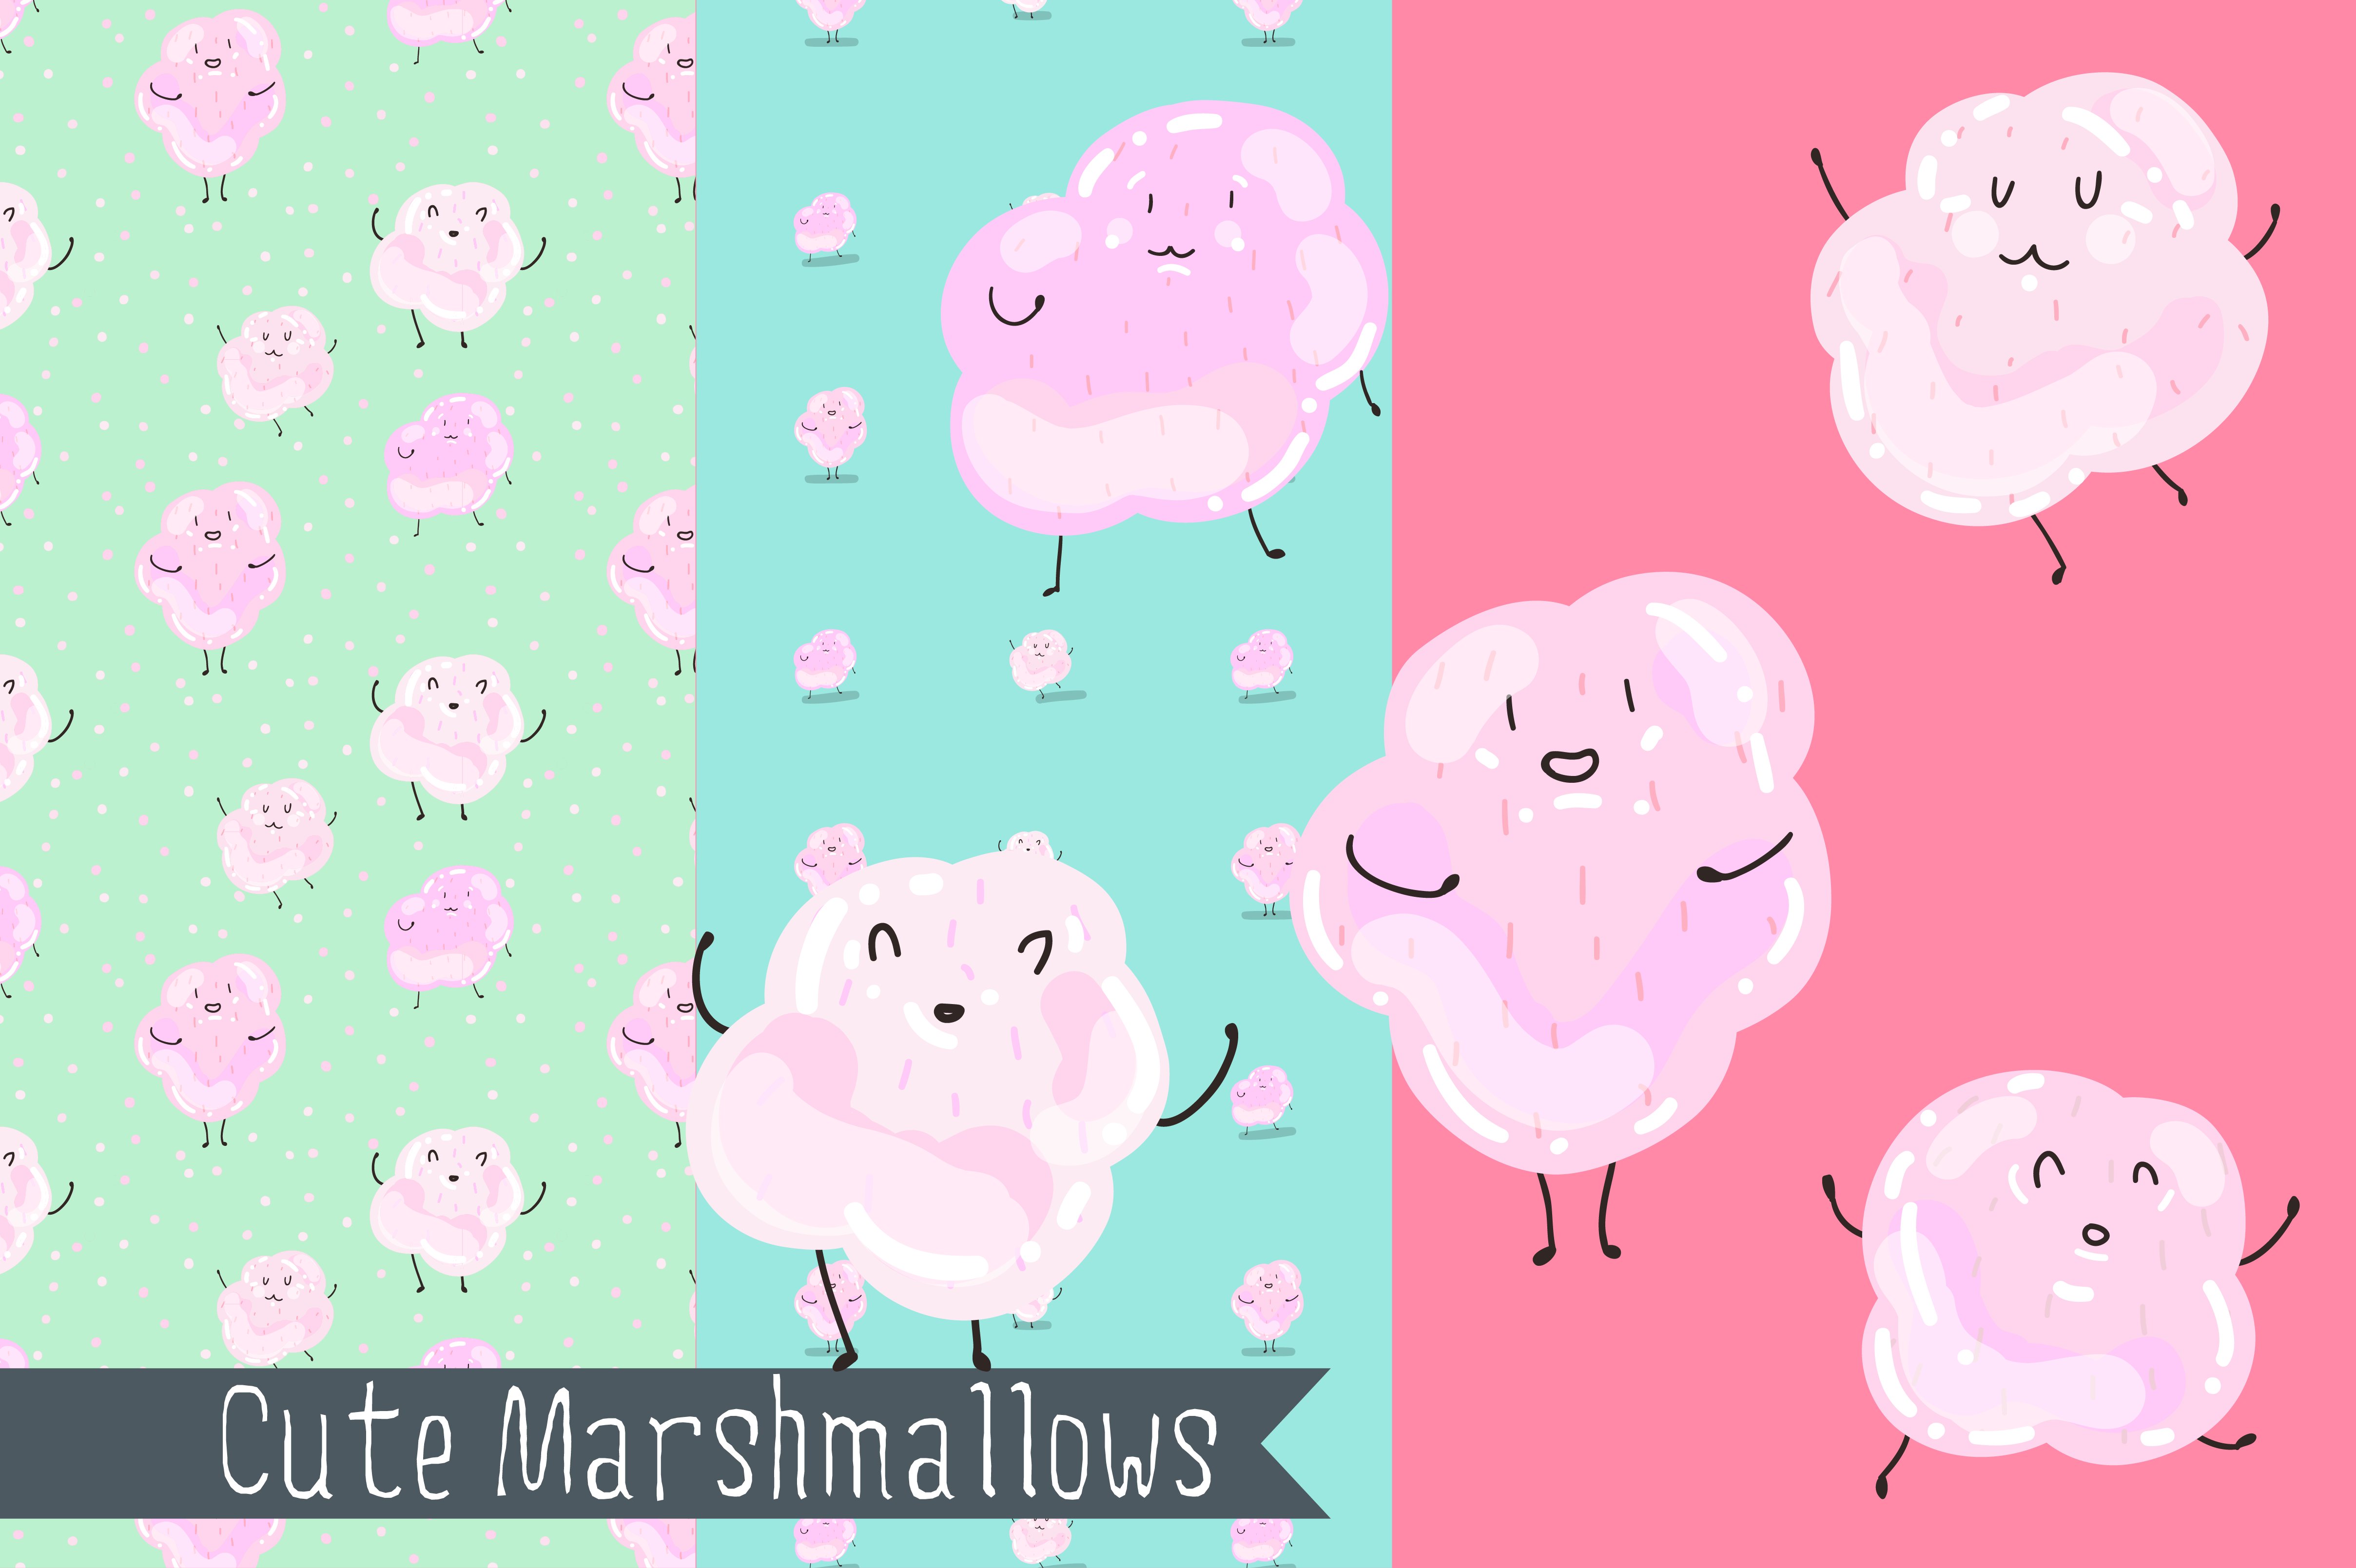 Cute marshmallows cover image.